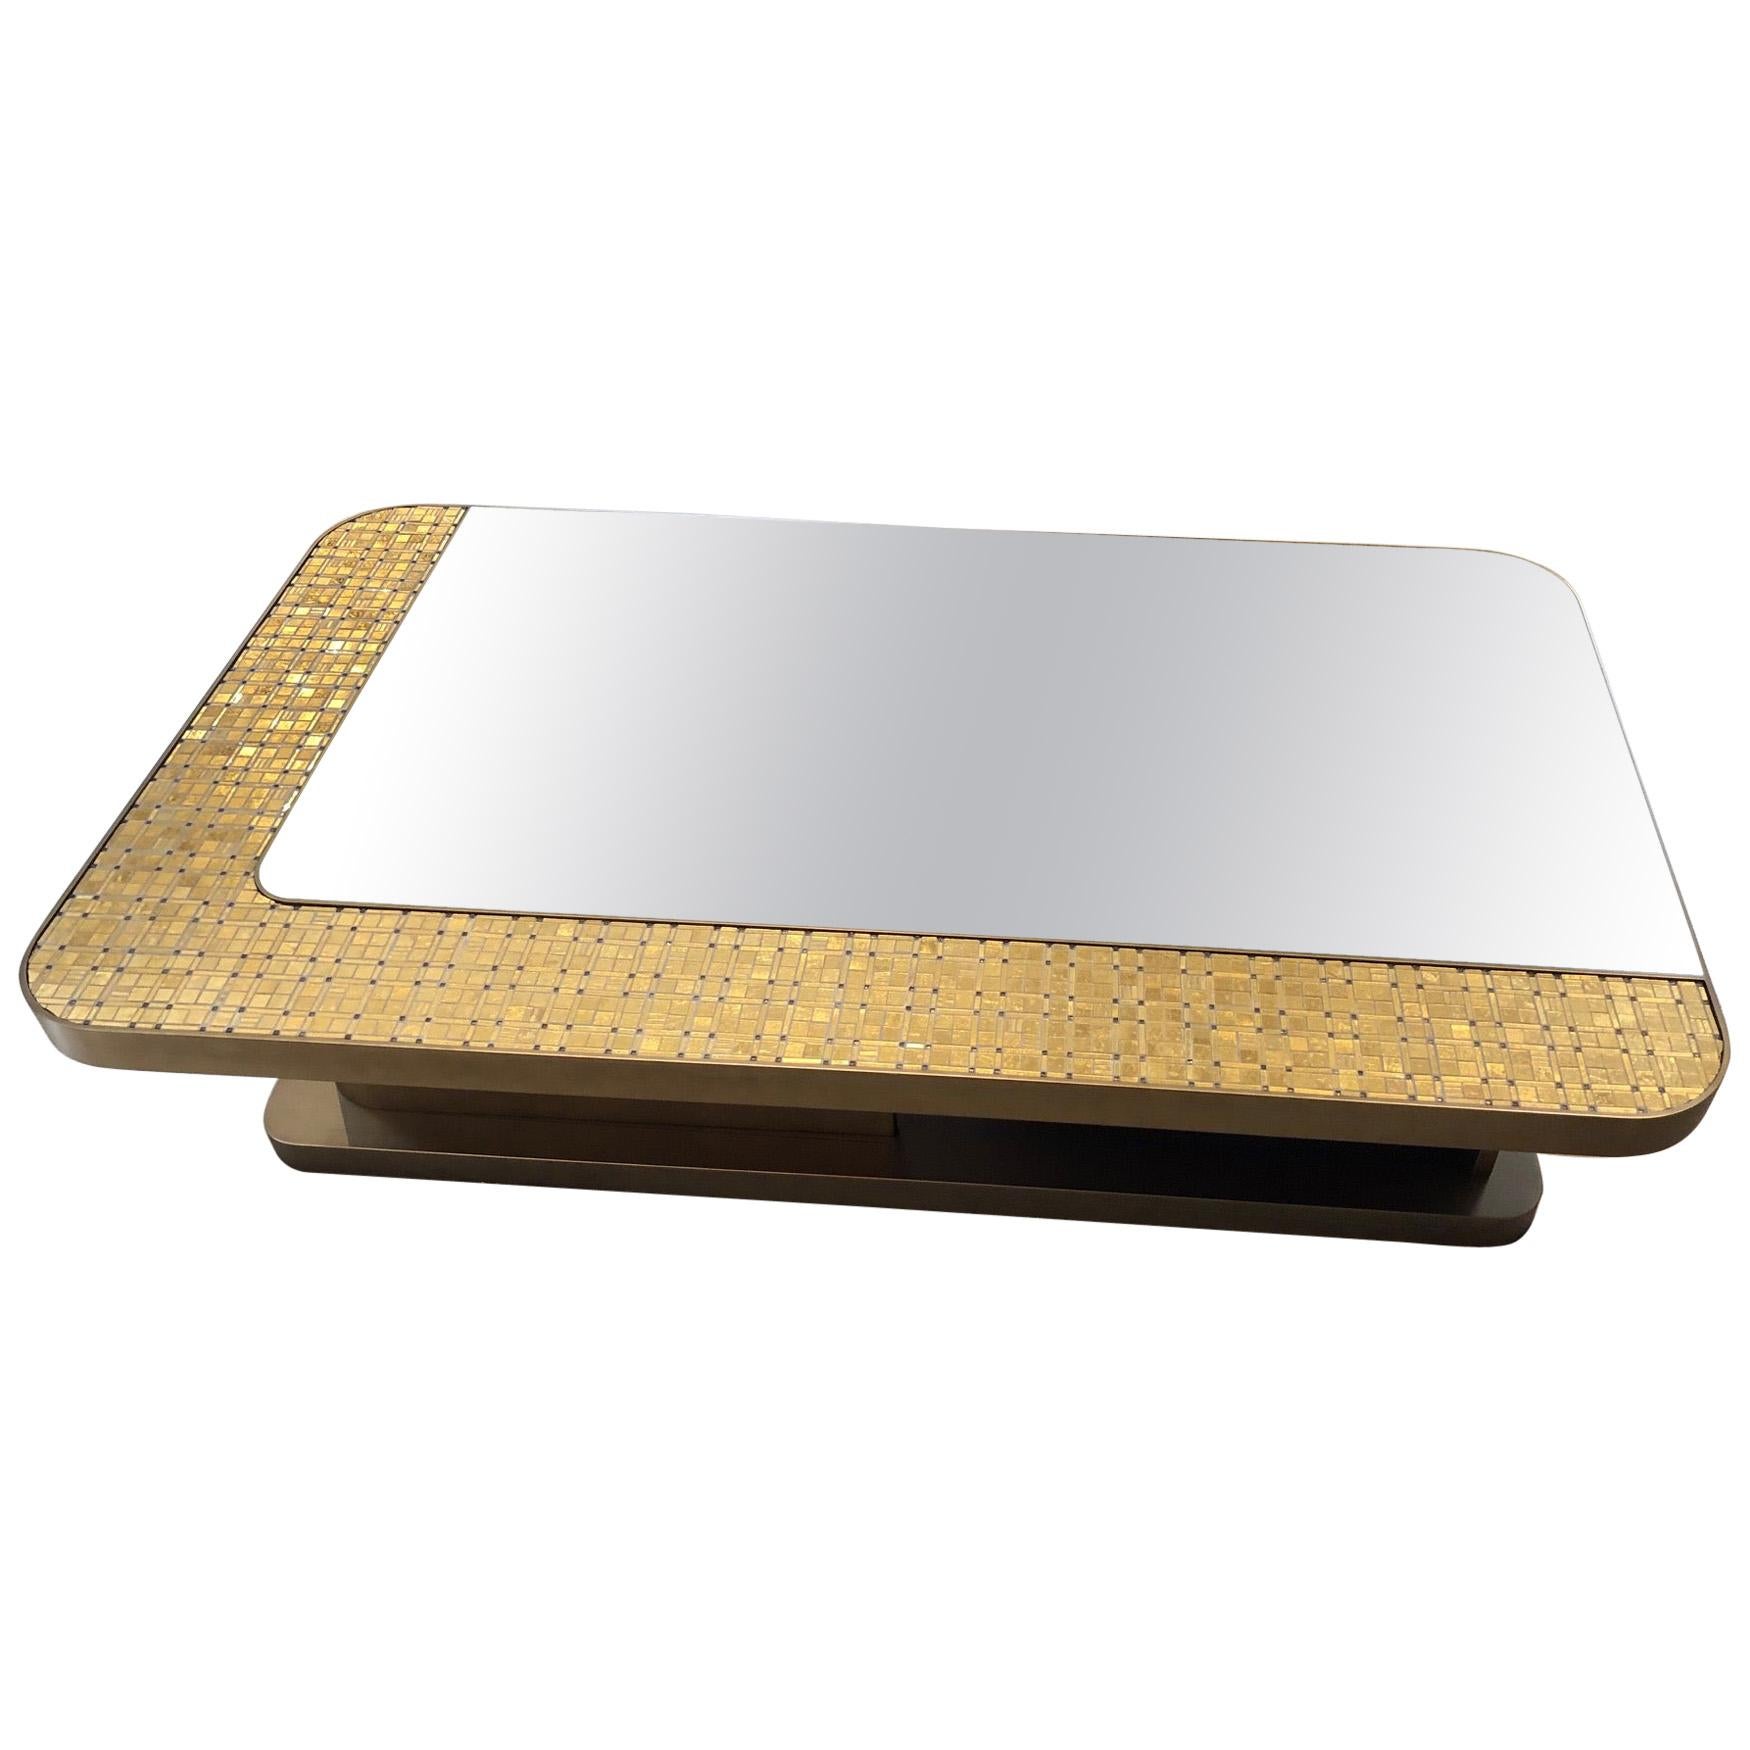 Special Price Display Bronze Finish Coffee Table Top Mirror & Decorative Mosaic